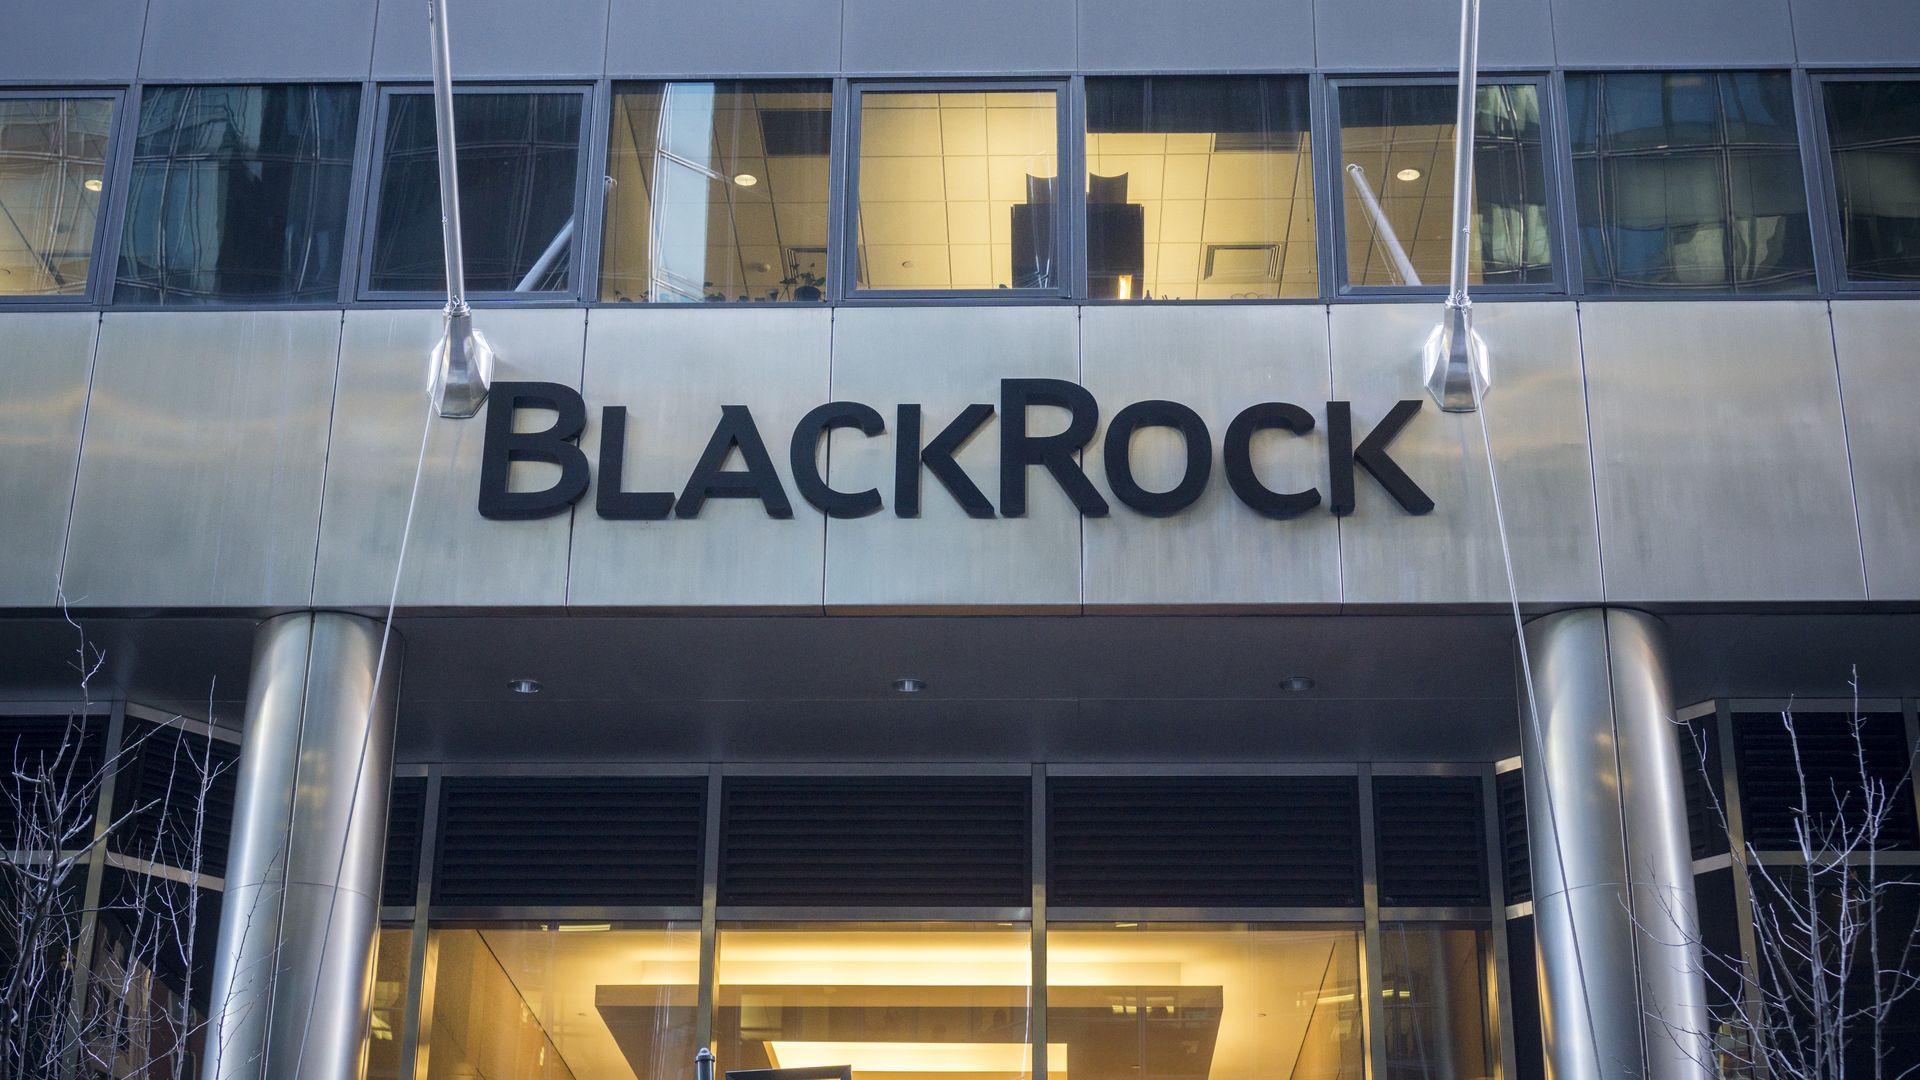 The New York headquarters of the BlackRock investment management firm on Friday, February 5, 2016